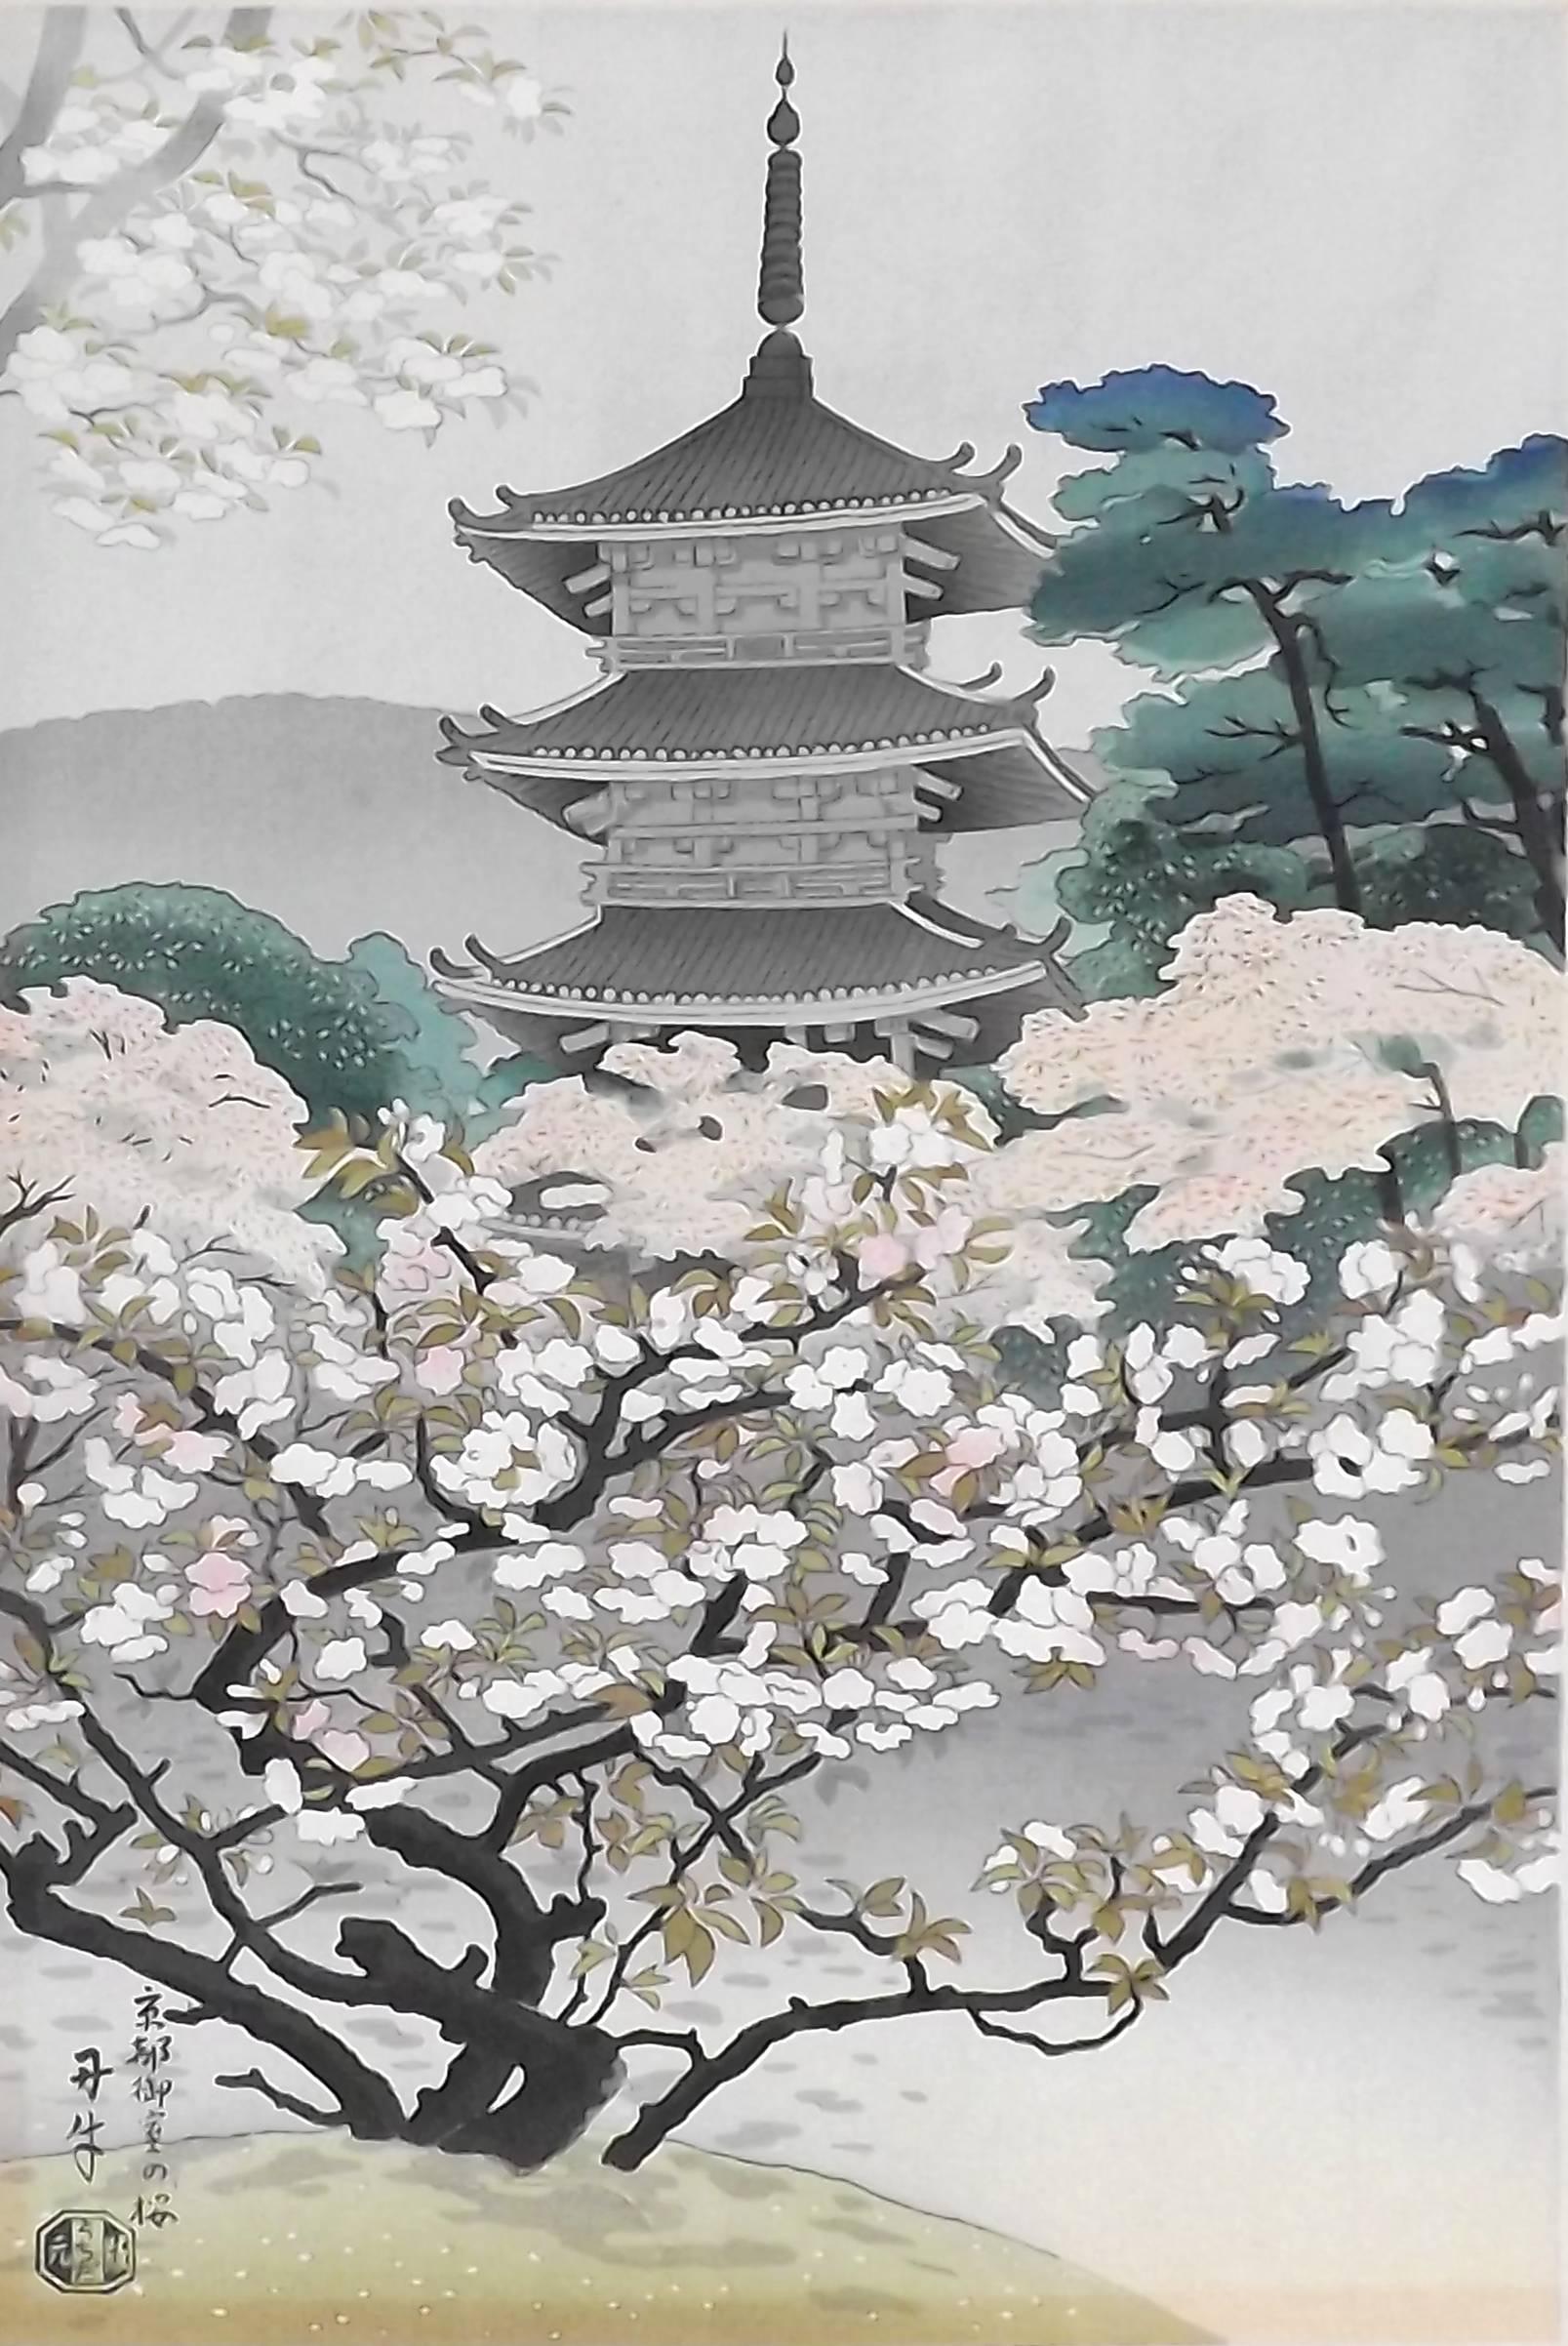 A stunning woodblock print of the pagoda of Ninnaji temple, with a cherry tree full of blossoms in the foreground. By Japanese artist Benji Asada (1899-1984). Measure: Unframed, image size is 14 1/2 inches tall by 9 1/2 inches wide.